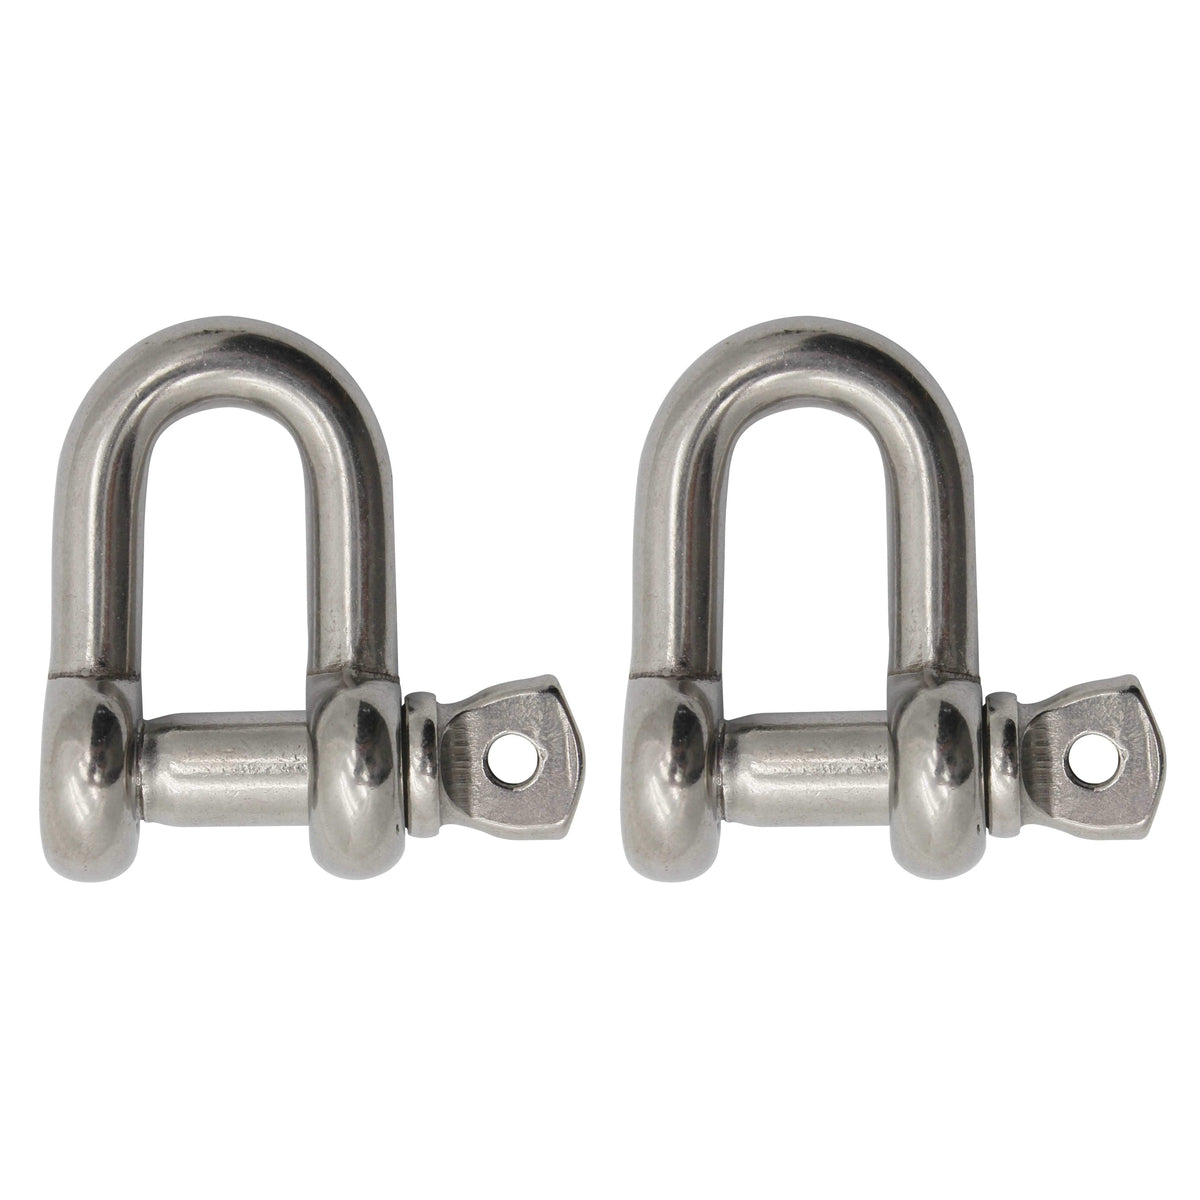 Extreme Max BoatTector SS Chain Shackle 5/16" 2-pk #3006.8264.2